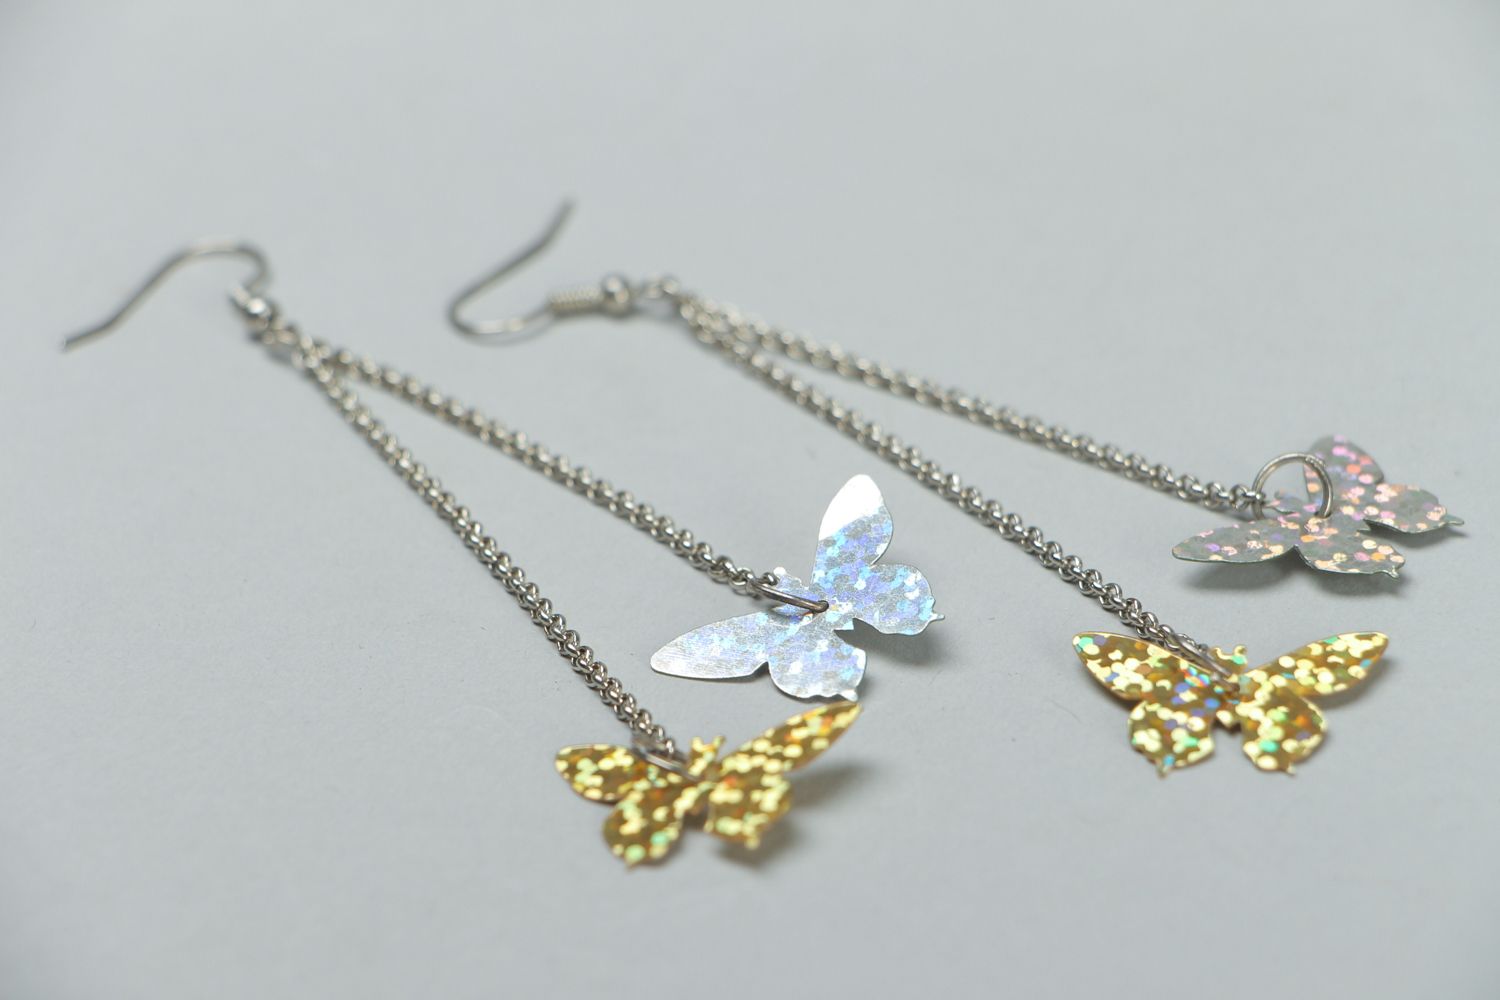 Metal earrings with charms in the shape of butterflies photo 2